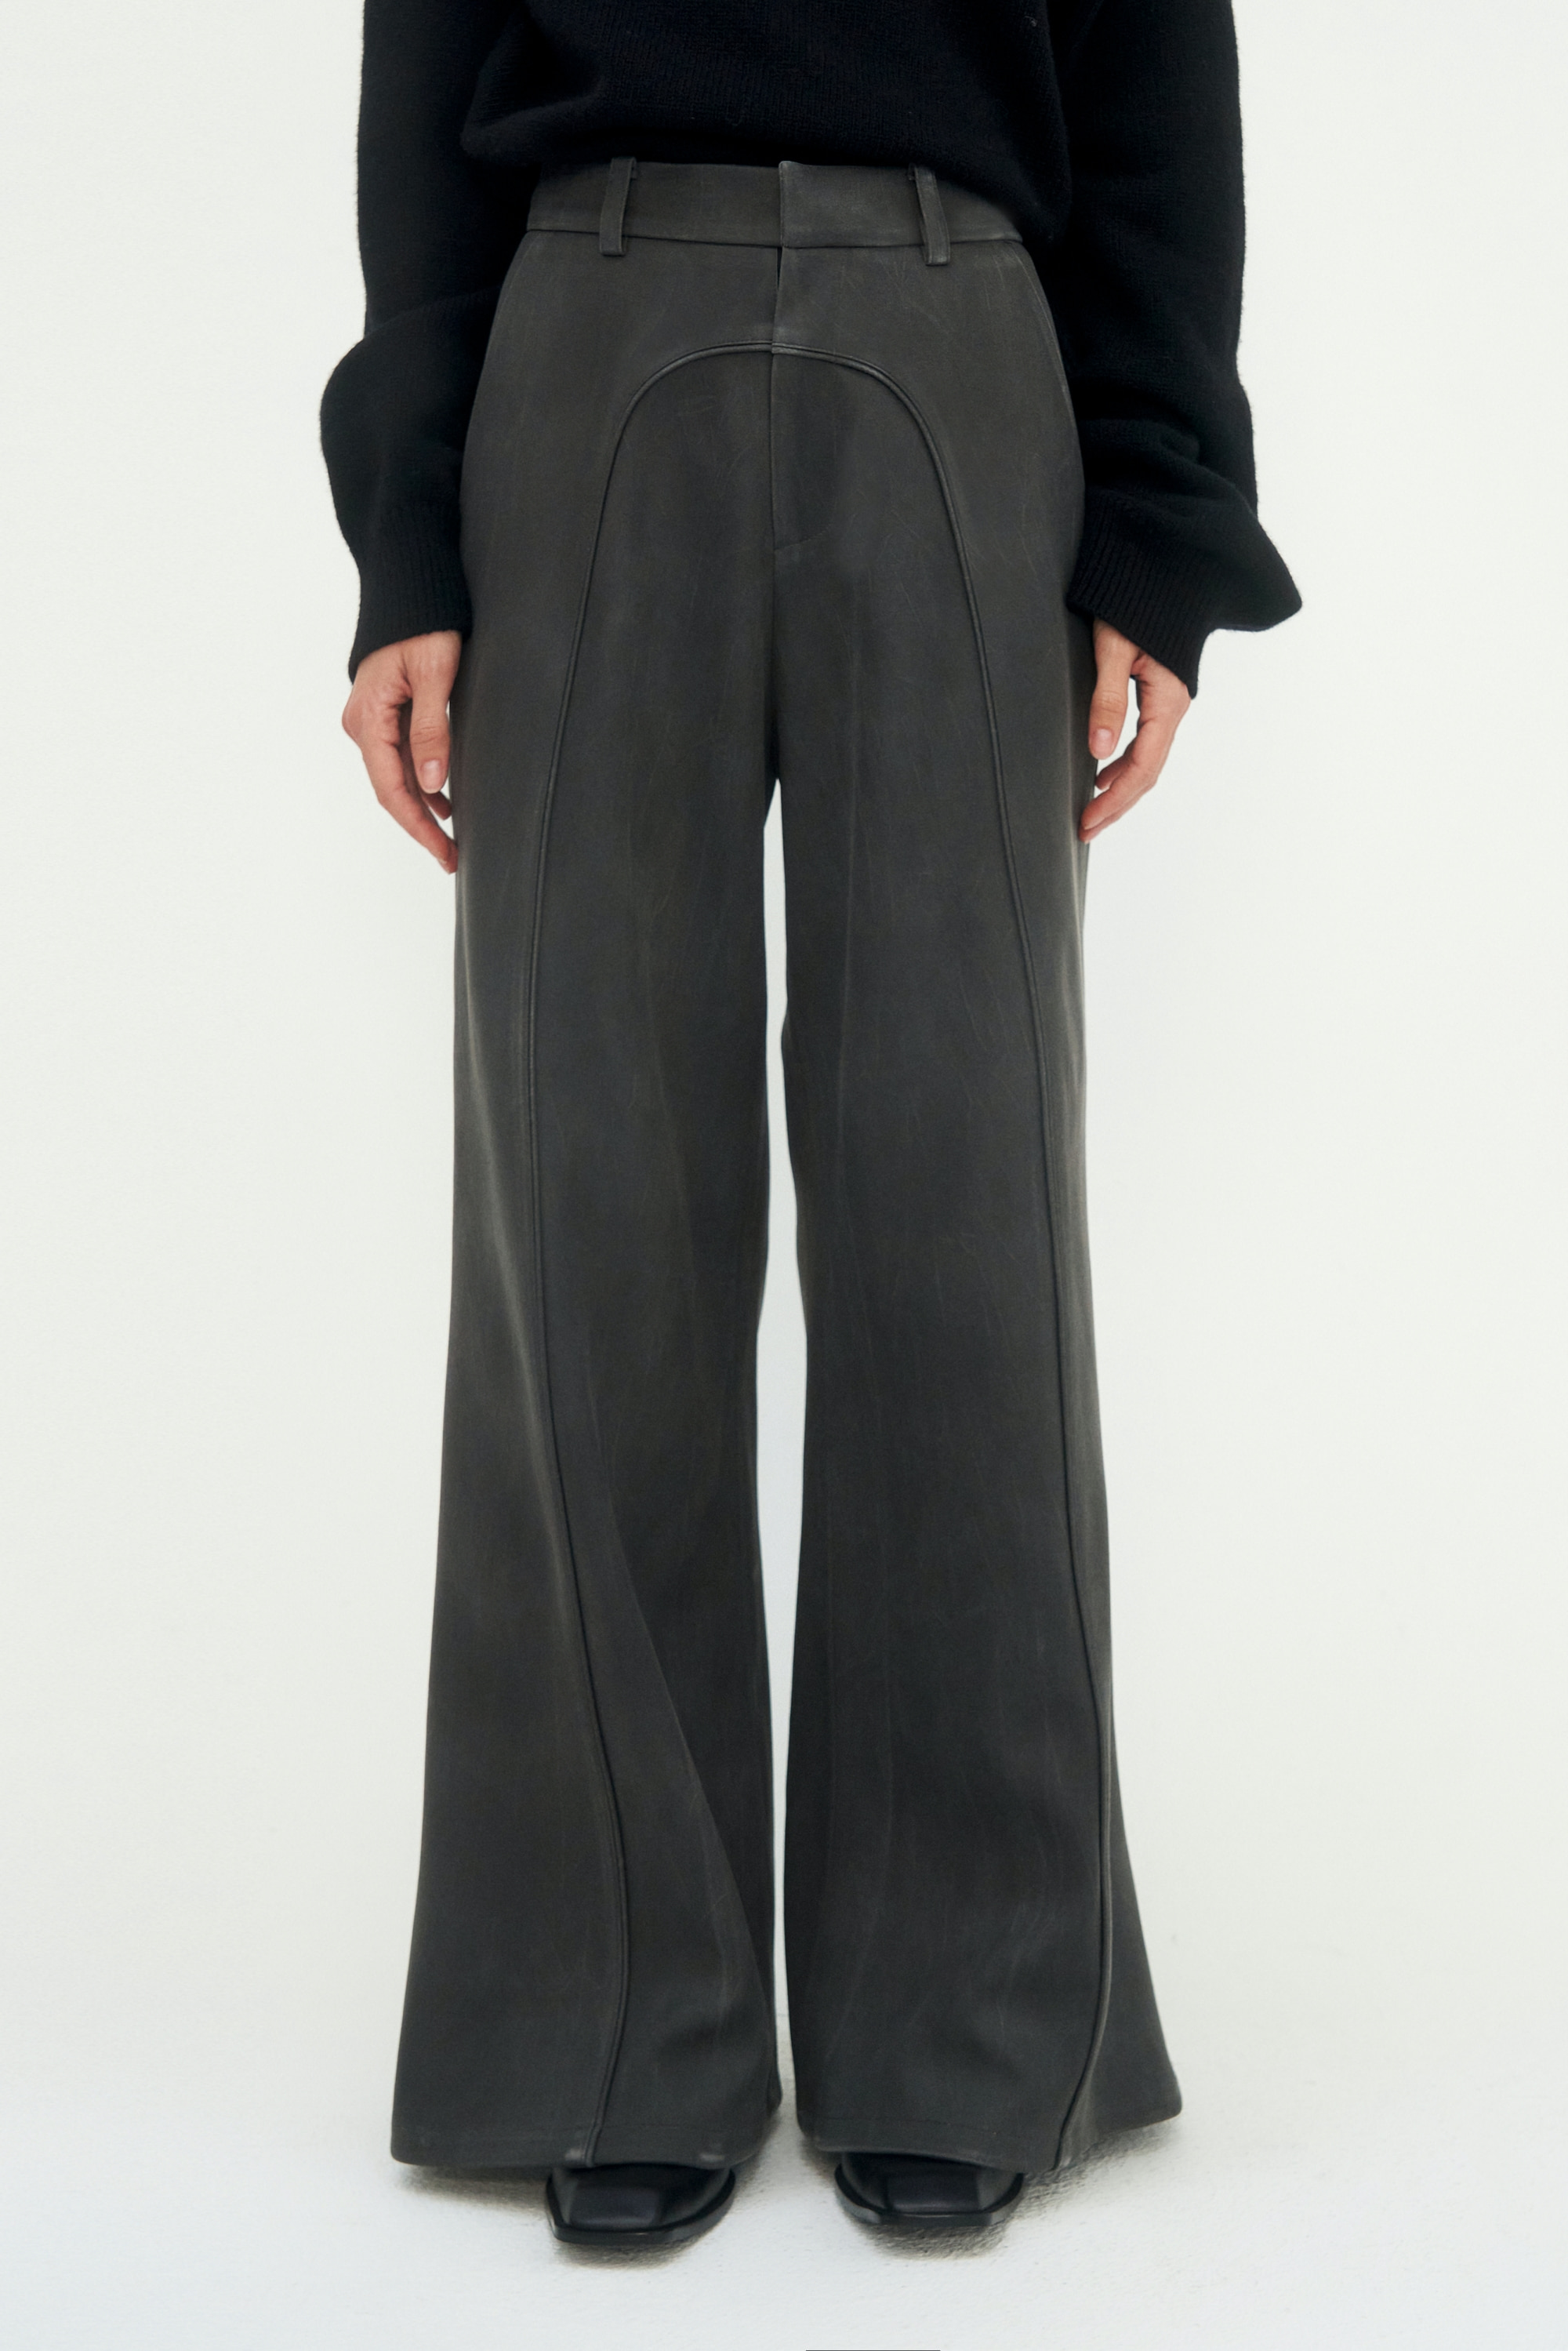 Suede Piping Classic Set-up Pants [ Charcoal ]